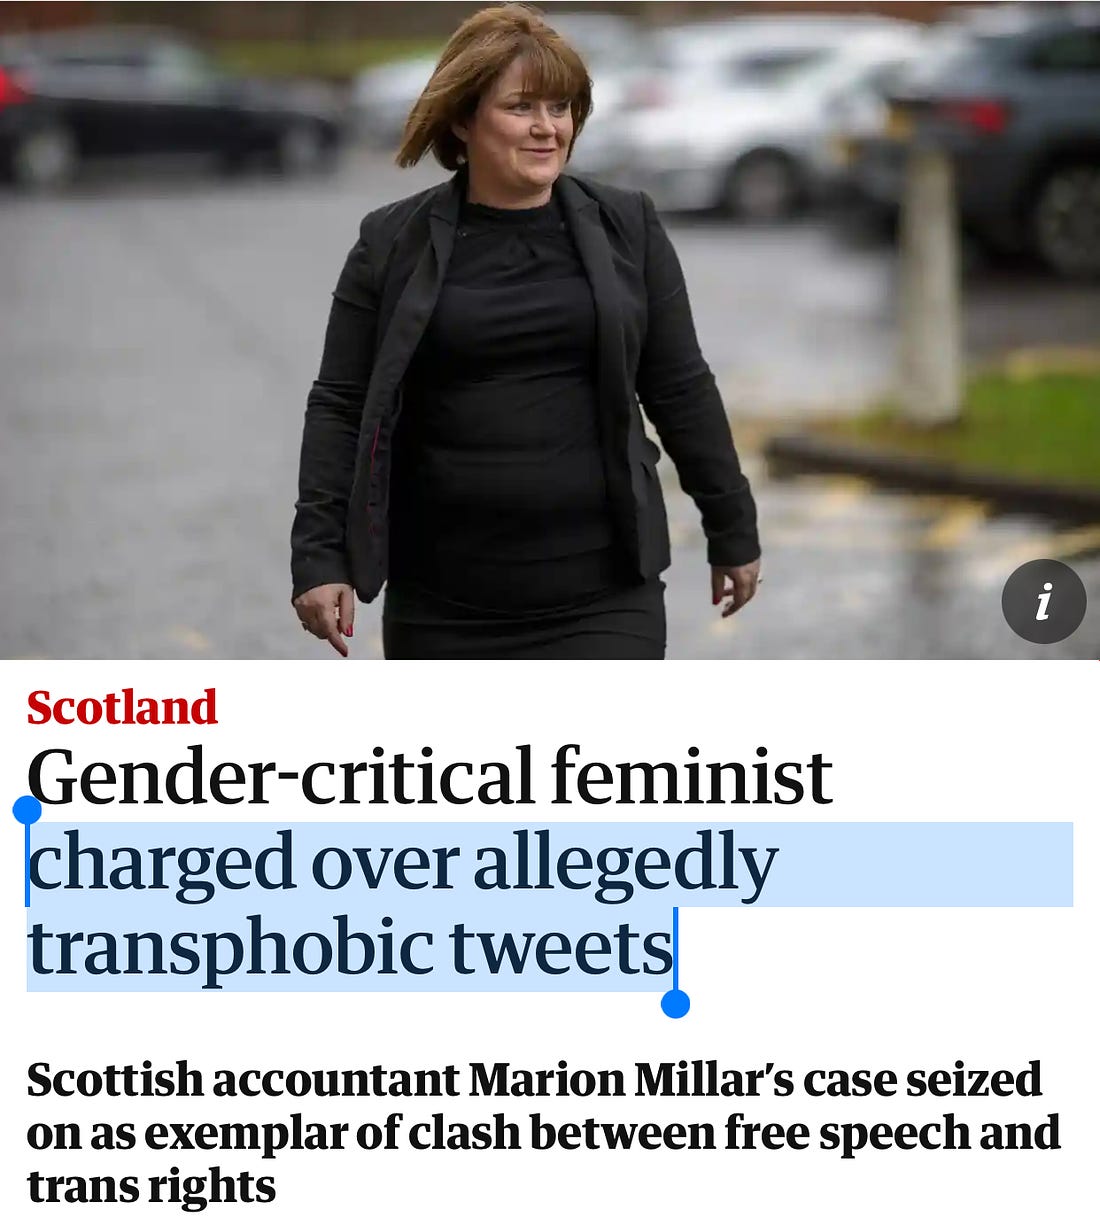 The Guardian's misleading headline reveals serious and structural errors in the paper’s reporting of LGBT issues.